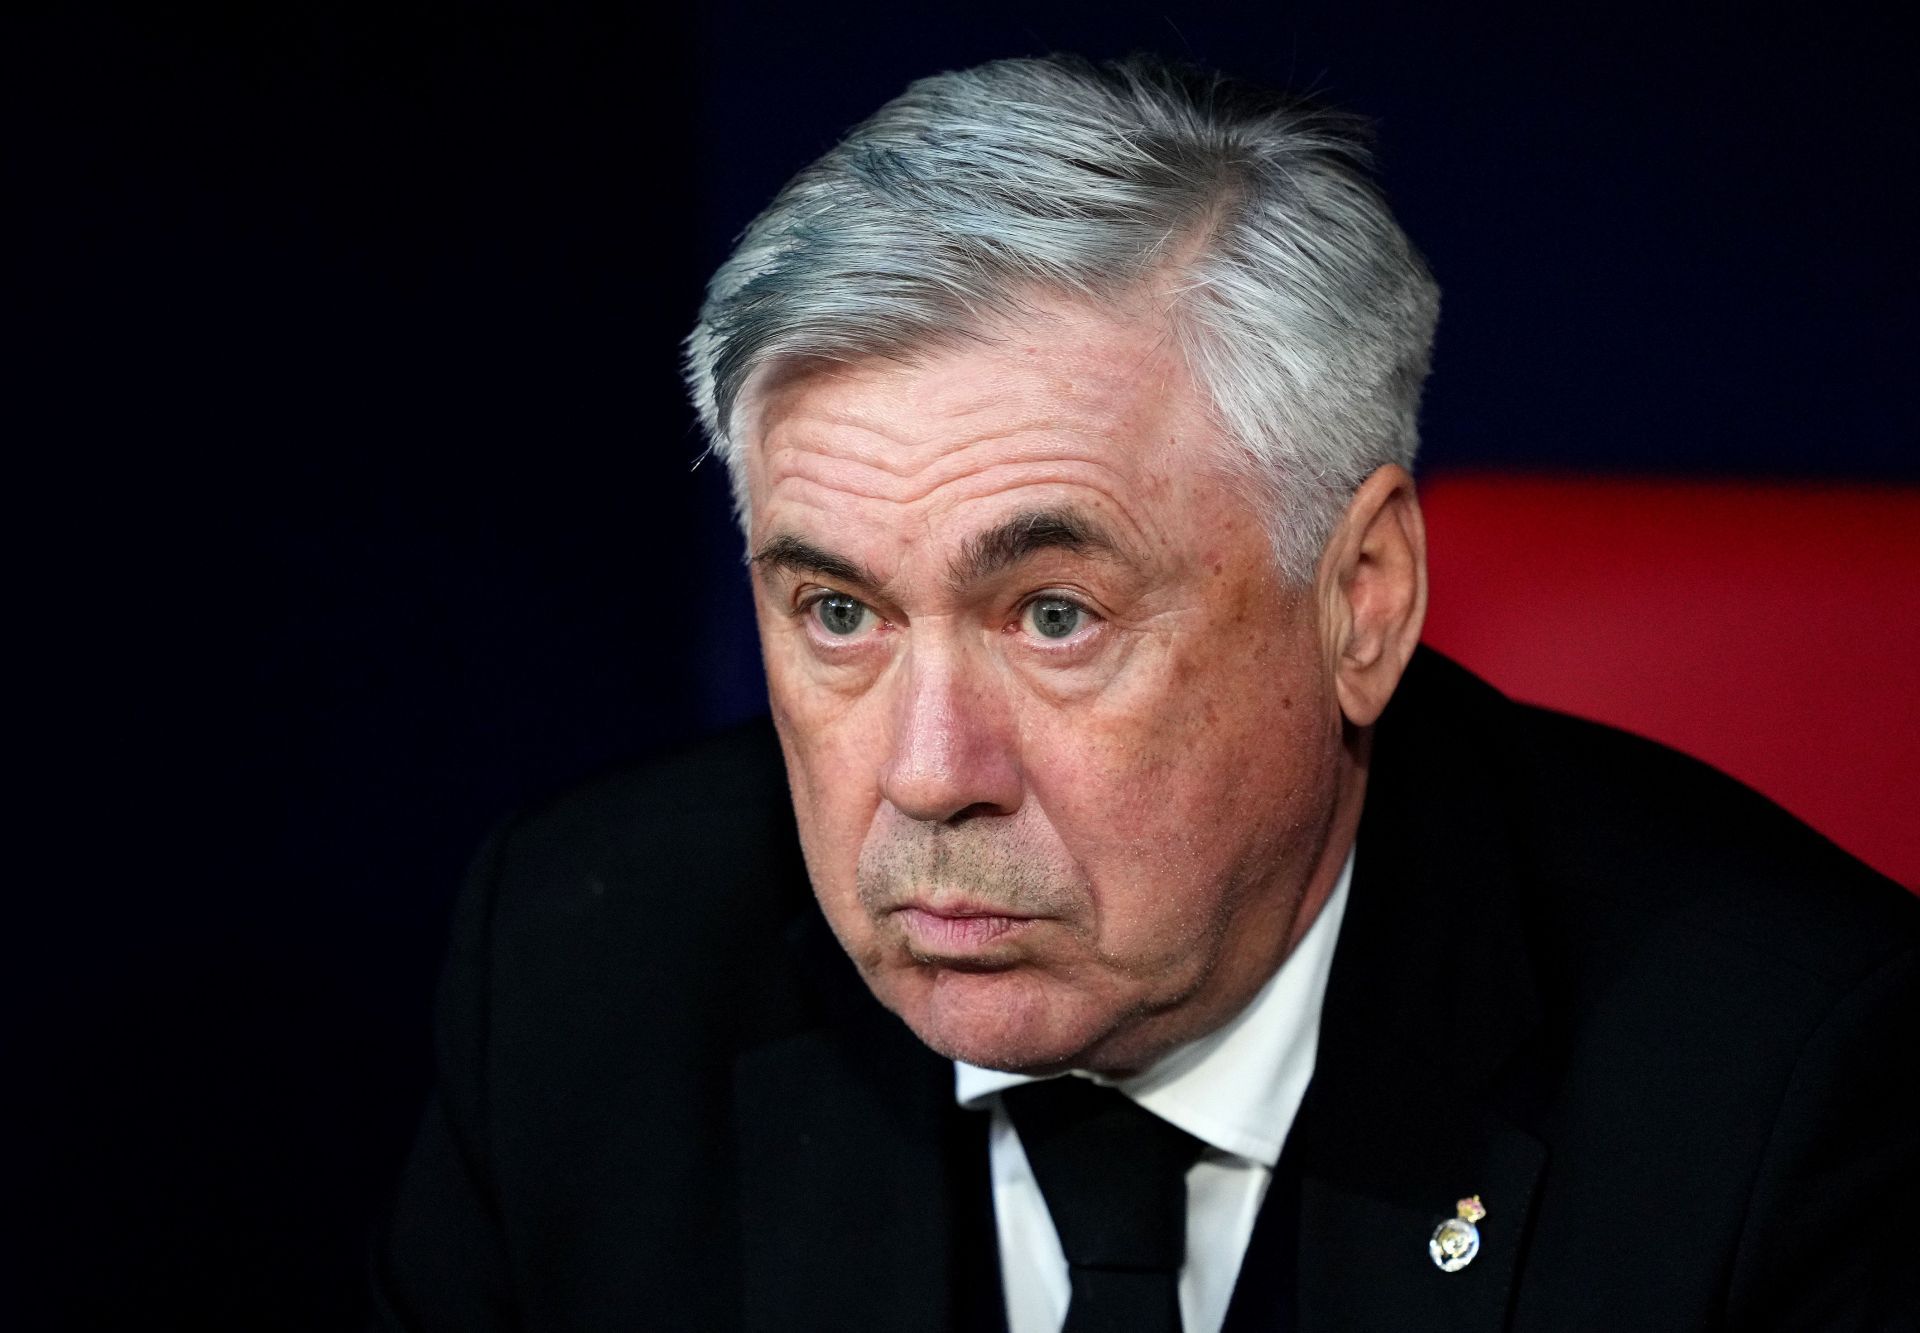 Ancelotti could lead Real Madrid to the double this season